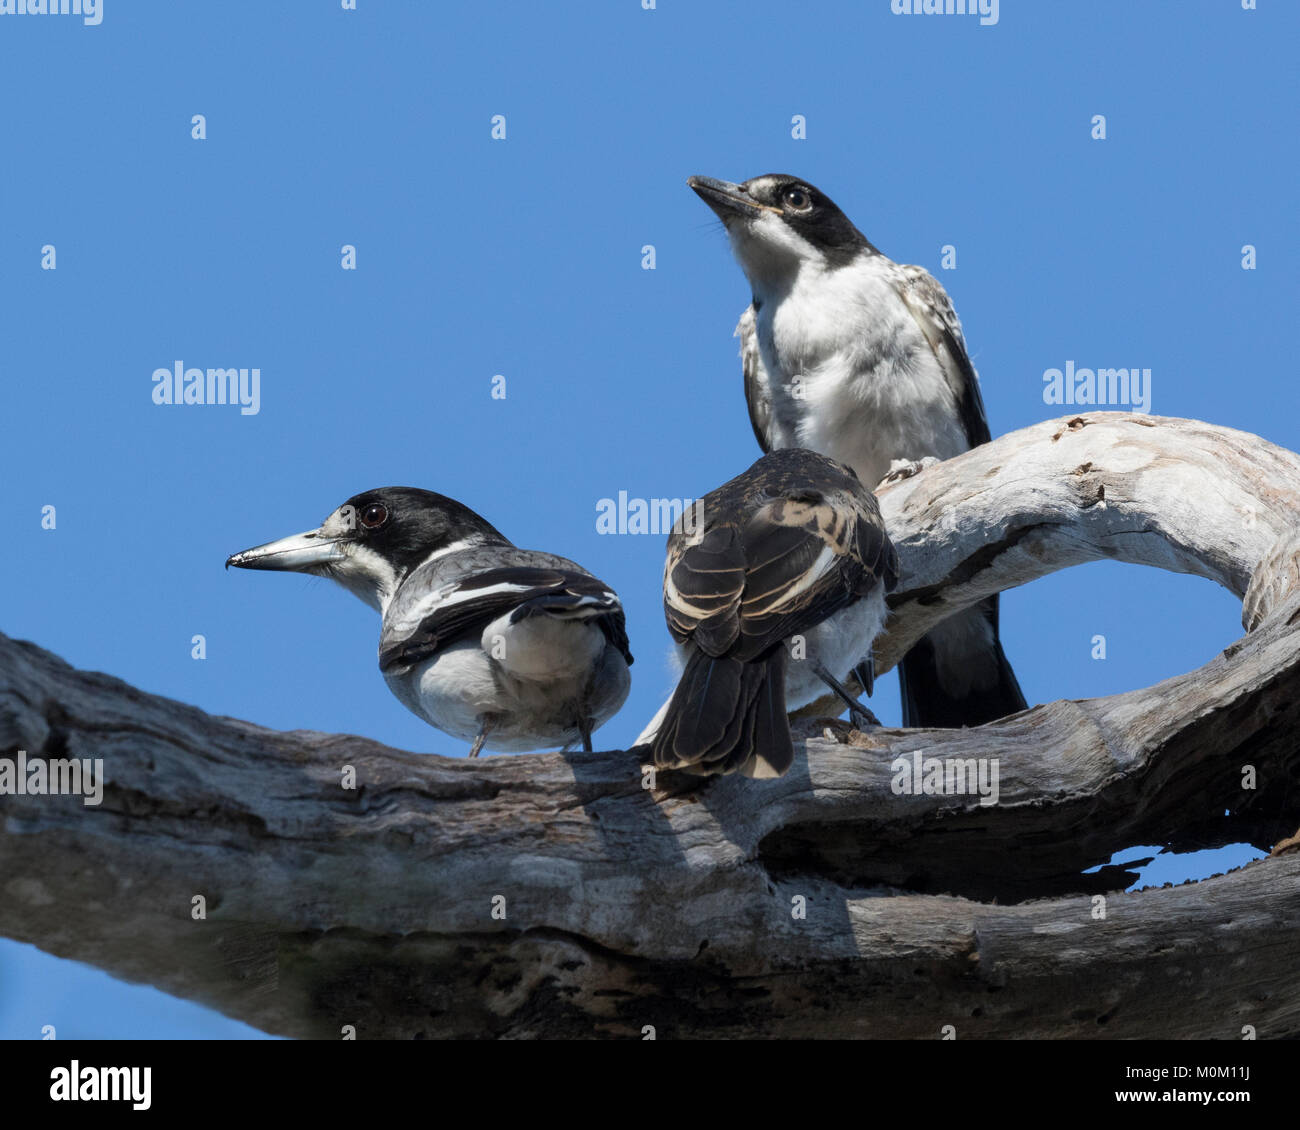 A juvenile Grey Butcherbird (Cracticus torquatus) perched in a tree with both parents present, in a local park in a Perth suburb, Western Australia Stock Photo